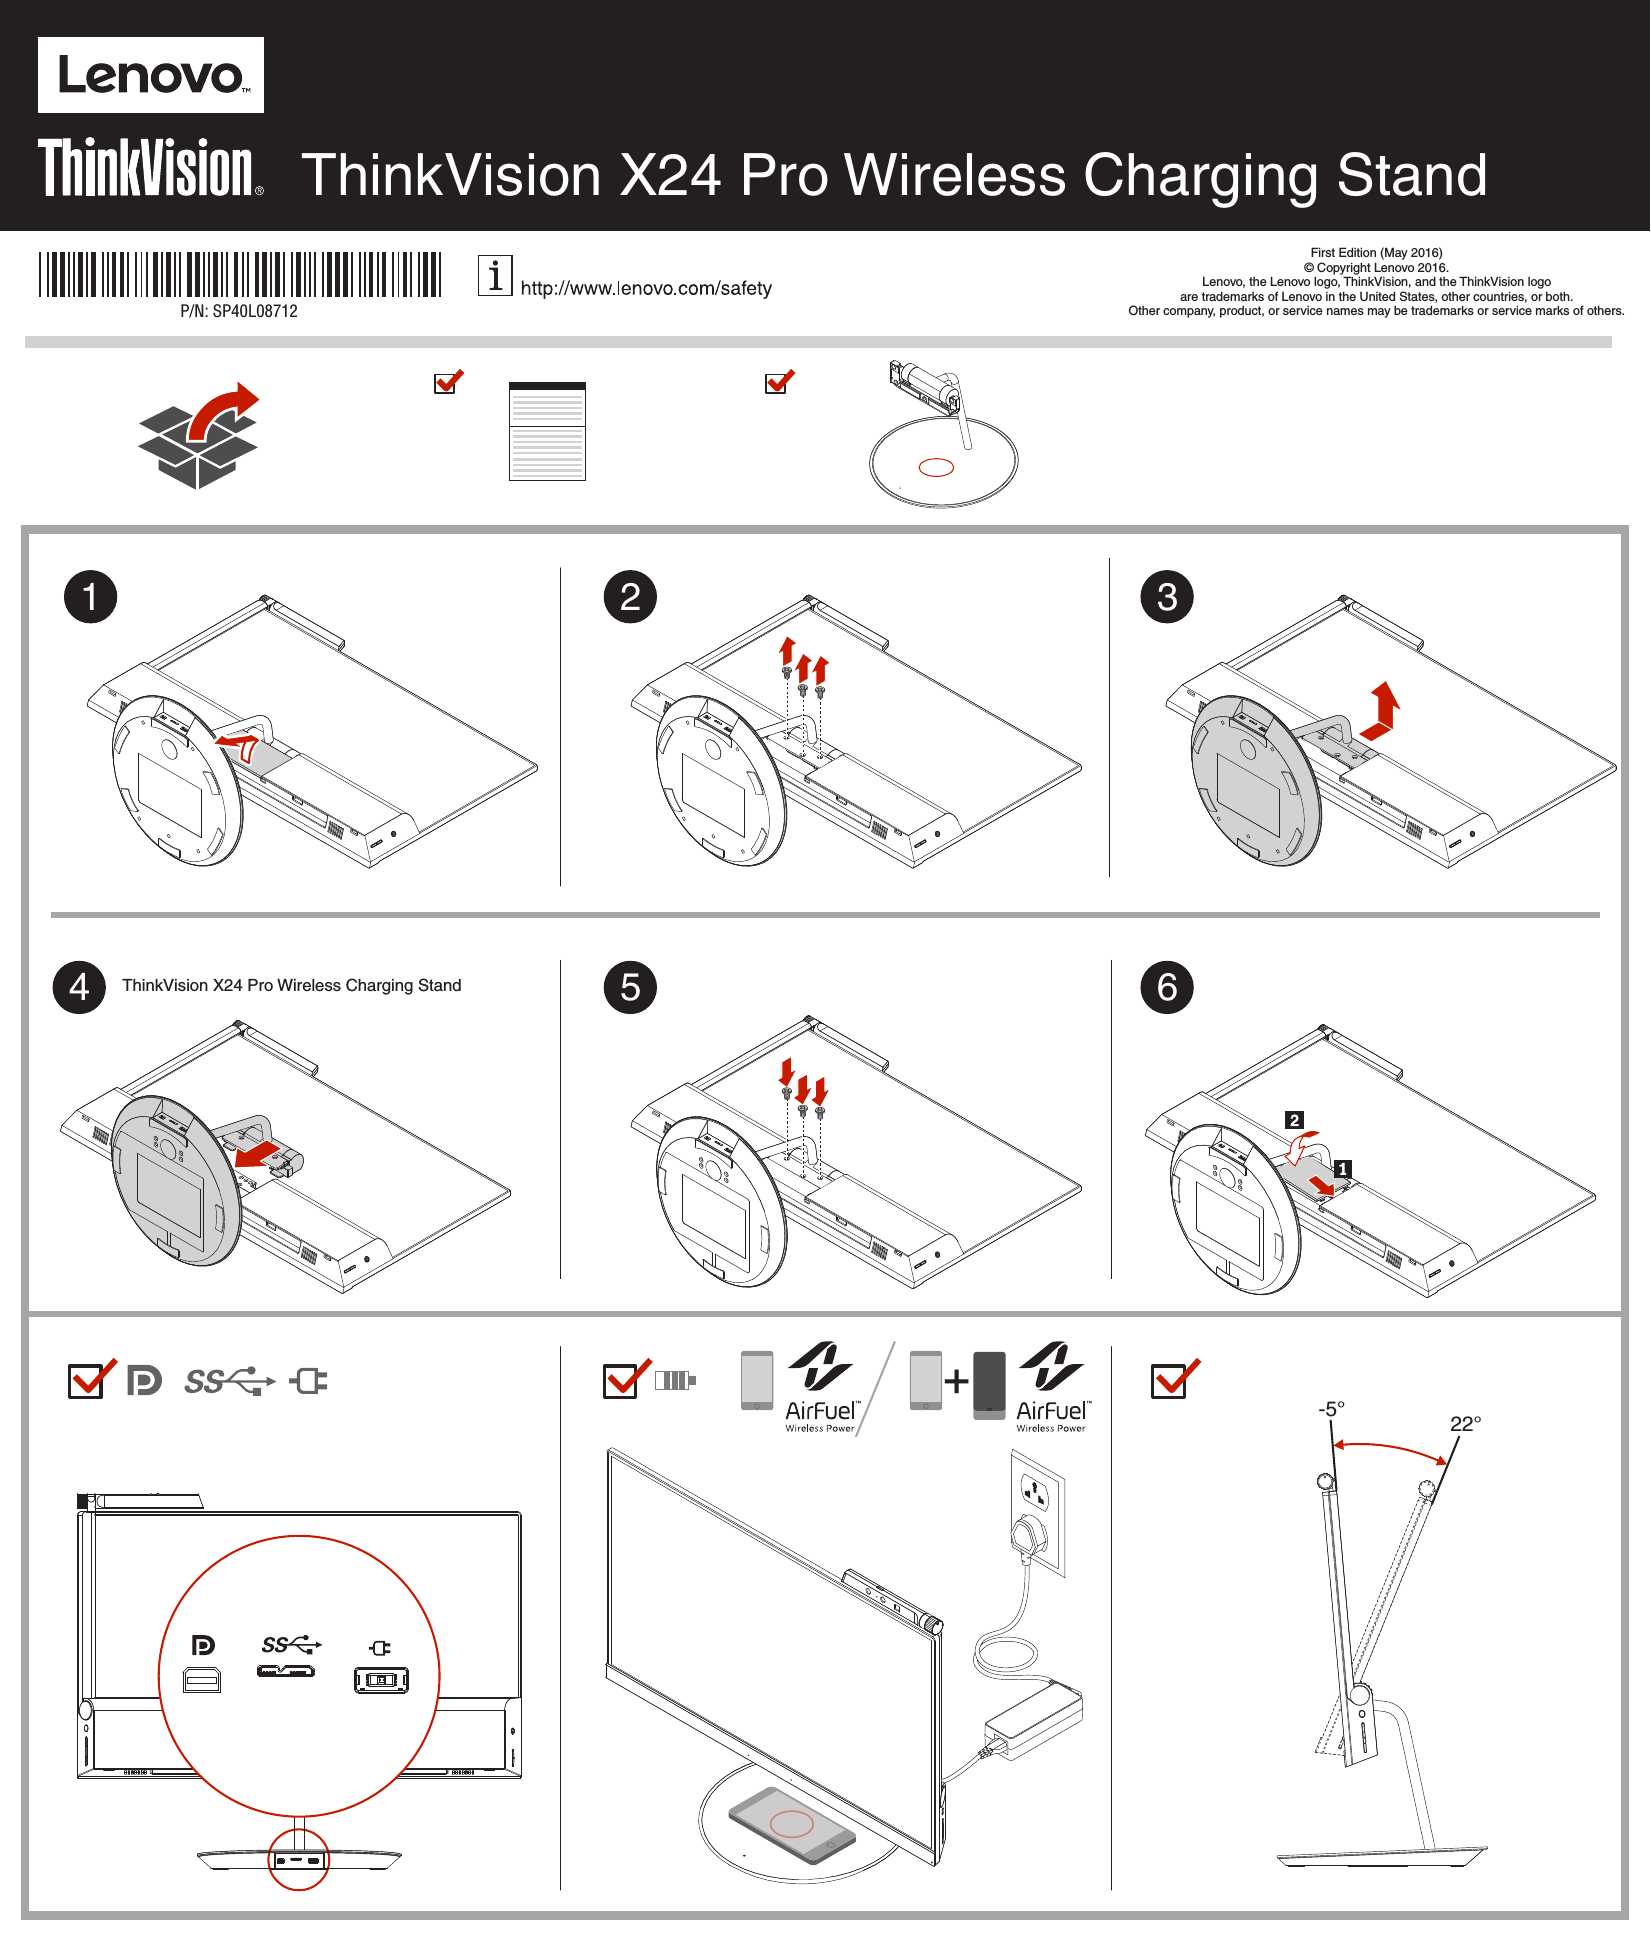 ThinkVision X24 Pro Wireless Charging StandThinkVision X24 Pro Wireless Charging StandP/N: SP40L08712First Edition (May 2016)© Copyright Lenovo 2016.Lenovo, the Lenovo logo, ThinkVision, and the ThinkVision logo are trademarks of Lenovo in the United States, other countries, or both.Other company, product, or service names may be trademarks or service marks of others.12 354 6-5° 22°+